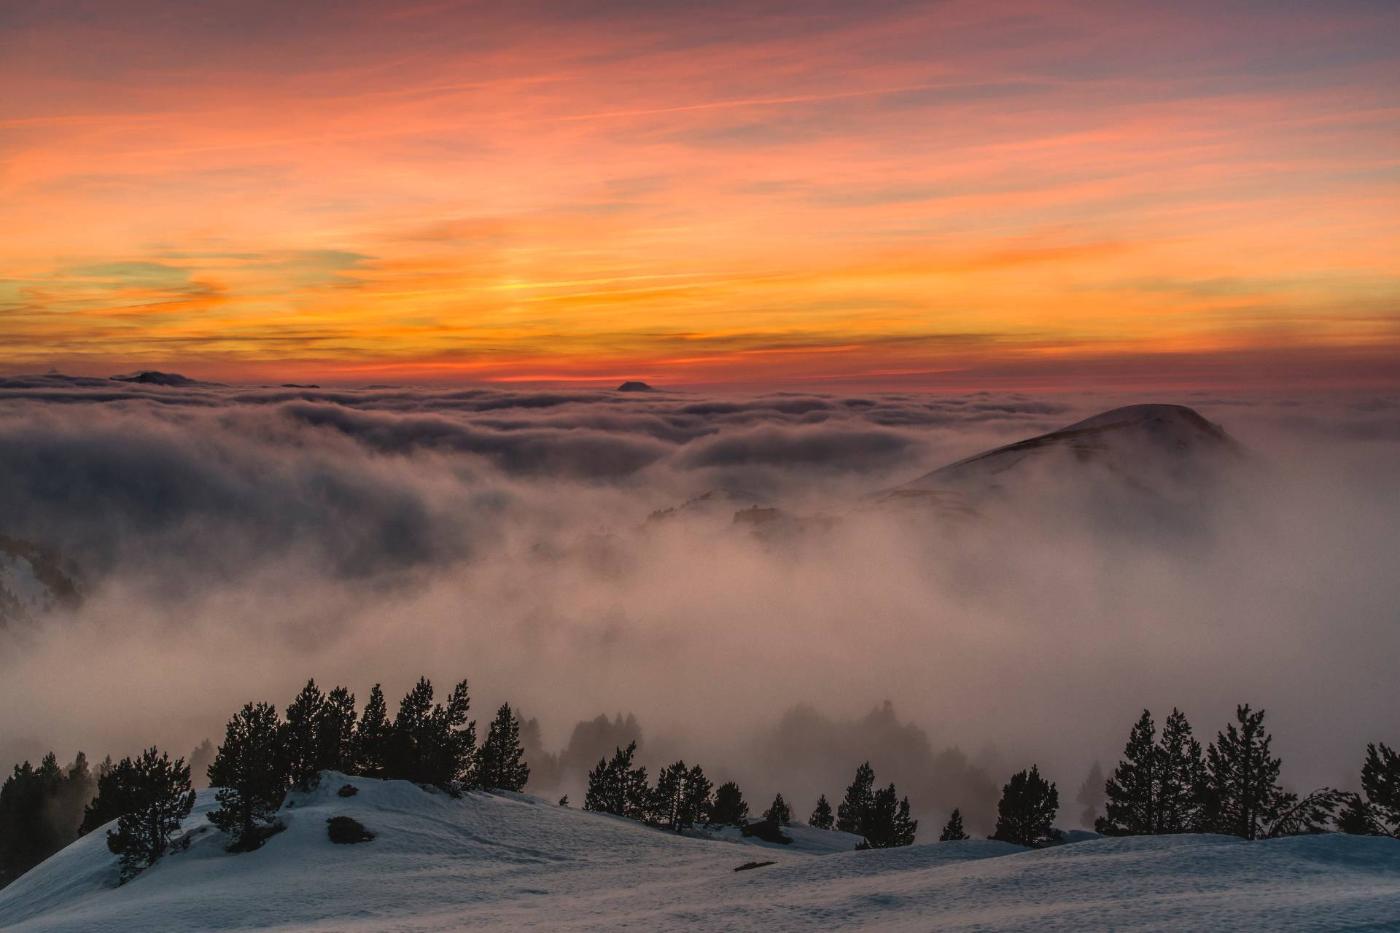 Pyrenees mountains between fog at sunset